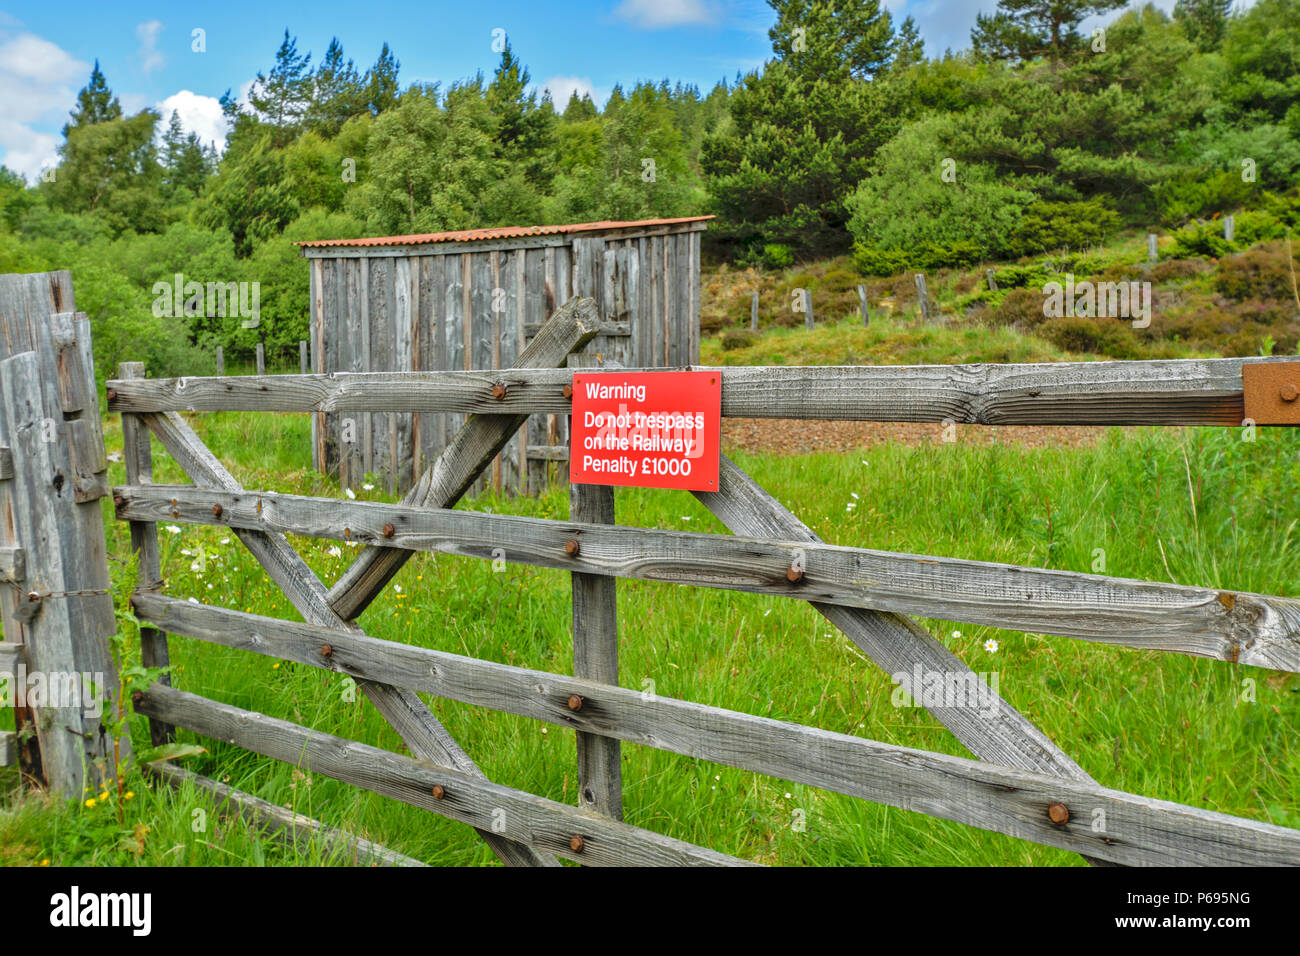 WOODEN GATE OPENING ONTO A RAILWAY LINE WITH WARNING SIGN IN RED DO NOT TRESPASS PENALTY £1000 Stock Photo